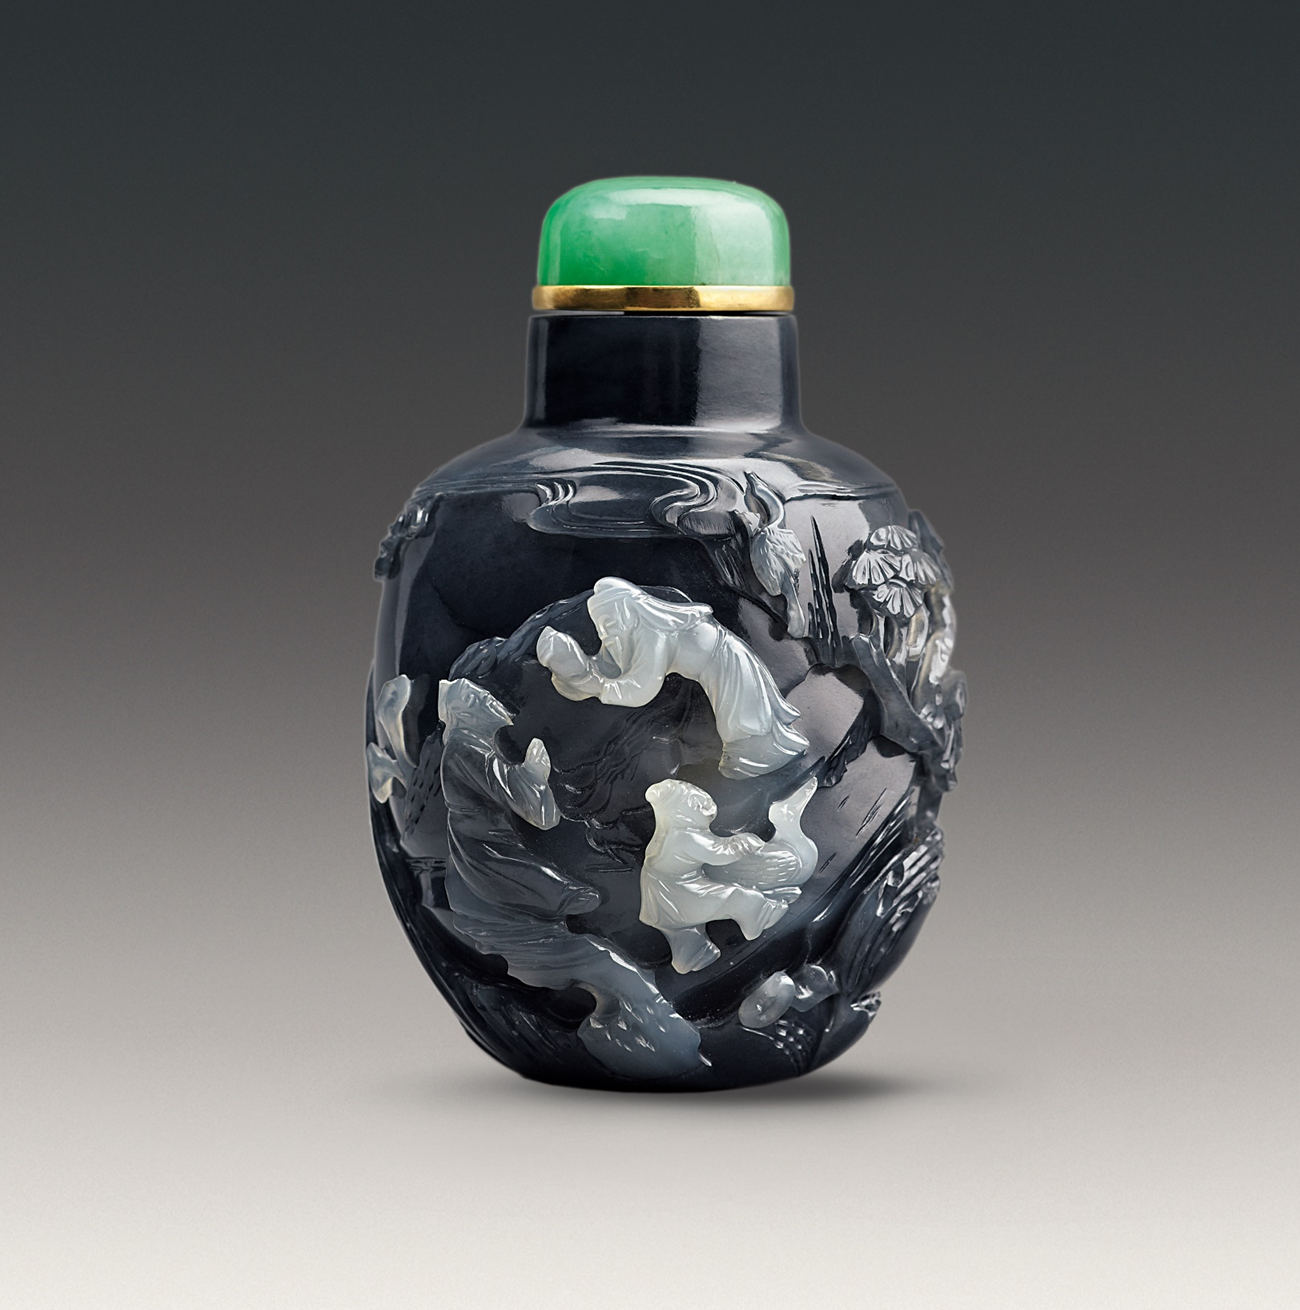 The Hong Kong Museum of Art today (September 28) announced that Christopher and Josephine Sin generously donated nearly 500 pieces of Chinese snuff bottles from the Fuyun Xuan Collection of Chinese Snuff Bottles for the museum's permanent collection. Picture shows the newly donated black jade snuff bottle with scholars and peach design. The artisan's unique craftsmanship is amply reflected through the delicate relief carving incorporating the natural colours and texture of the dark jade into its composition. 